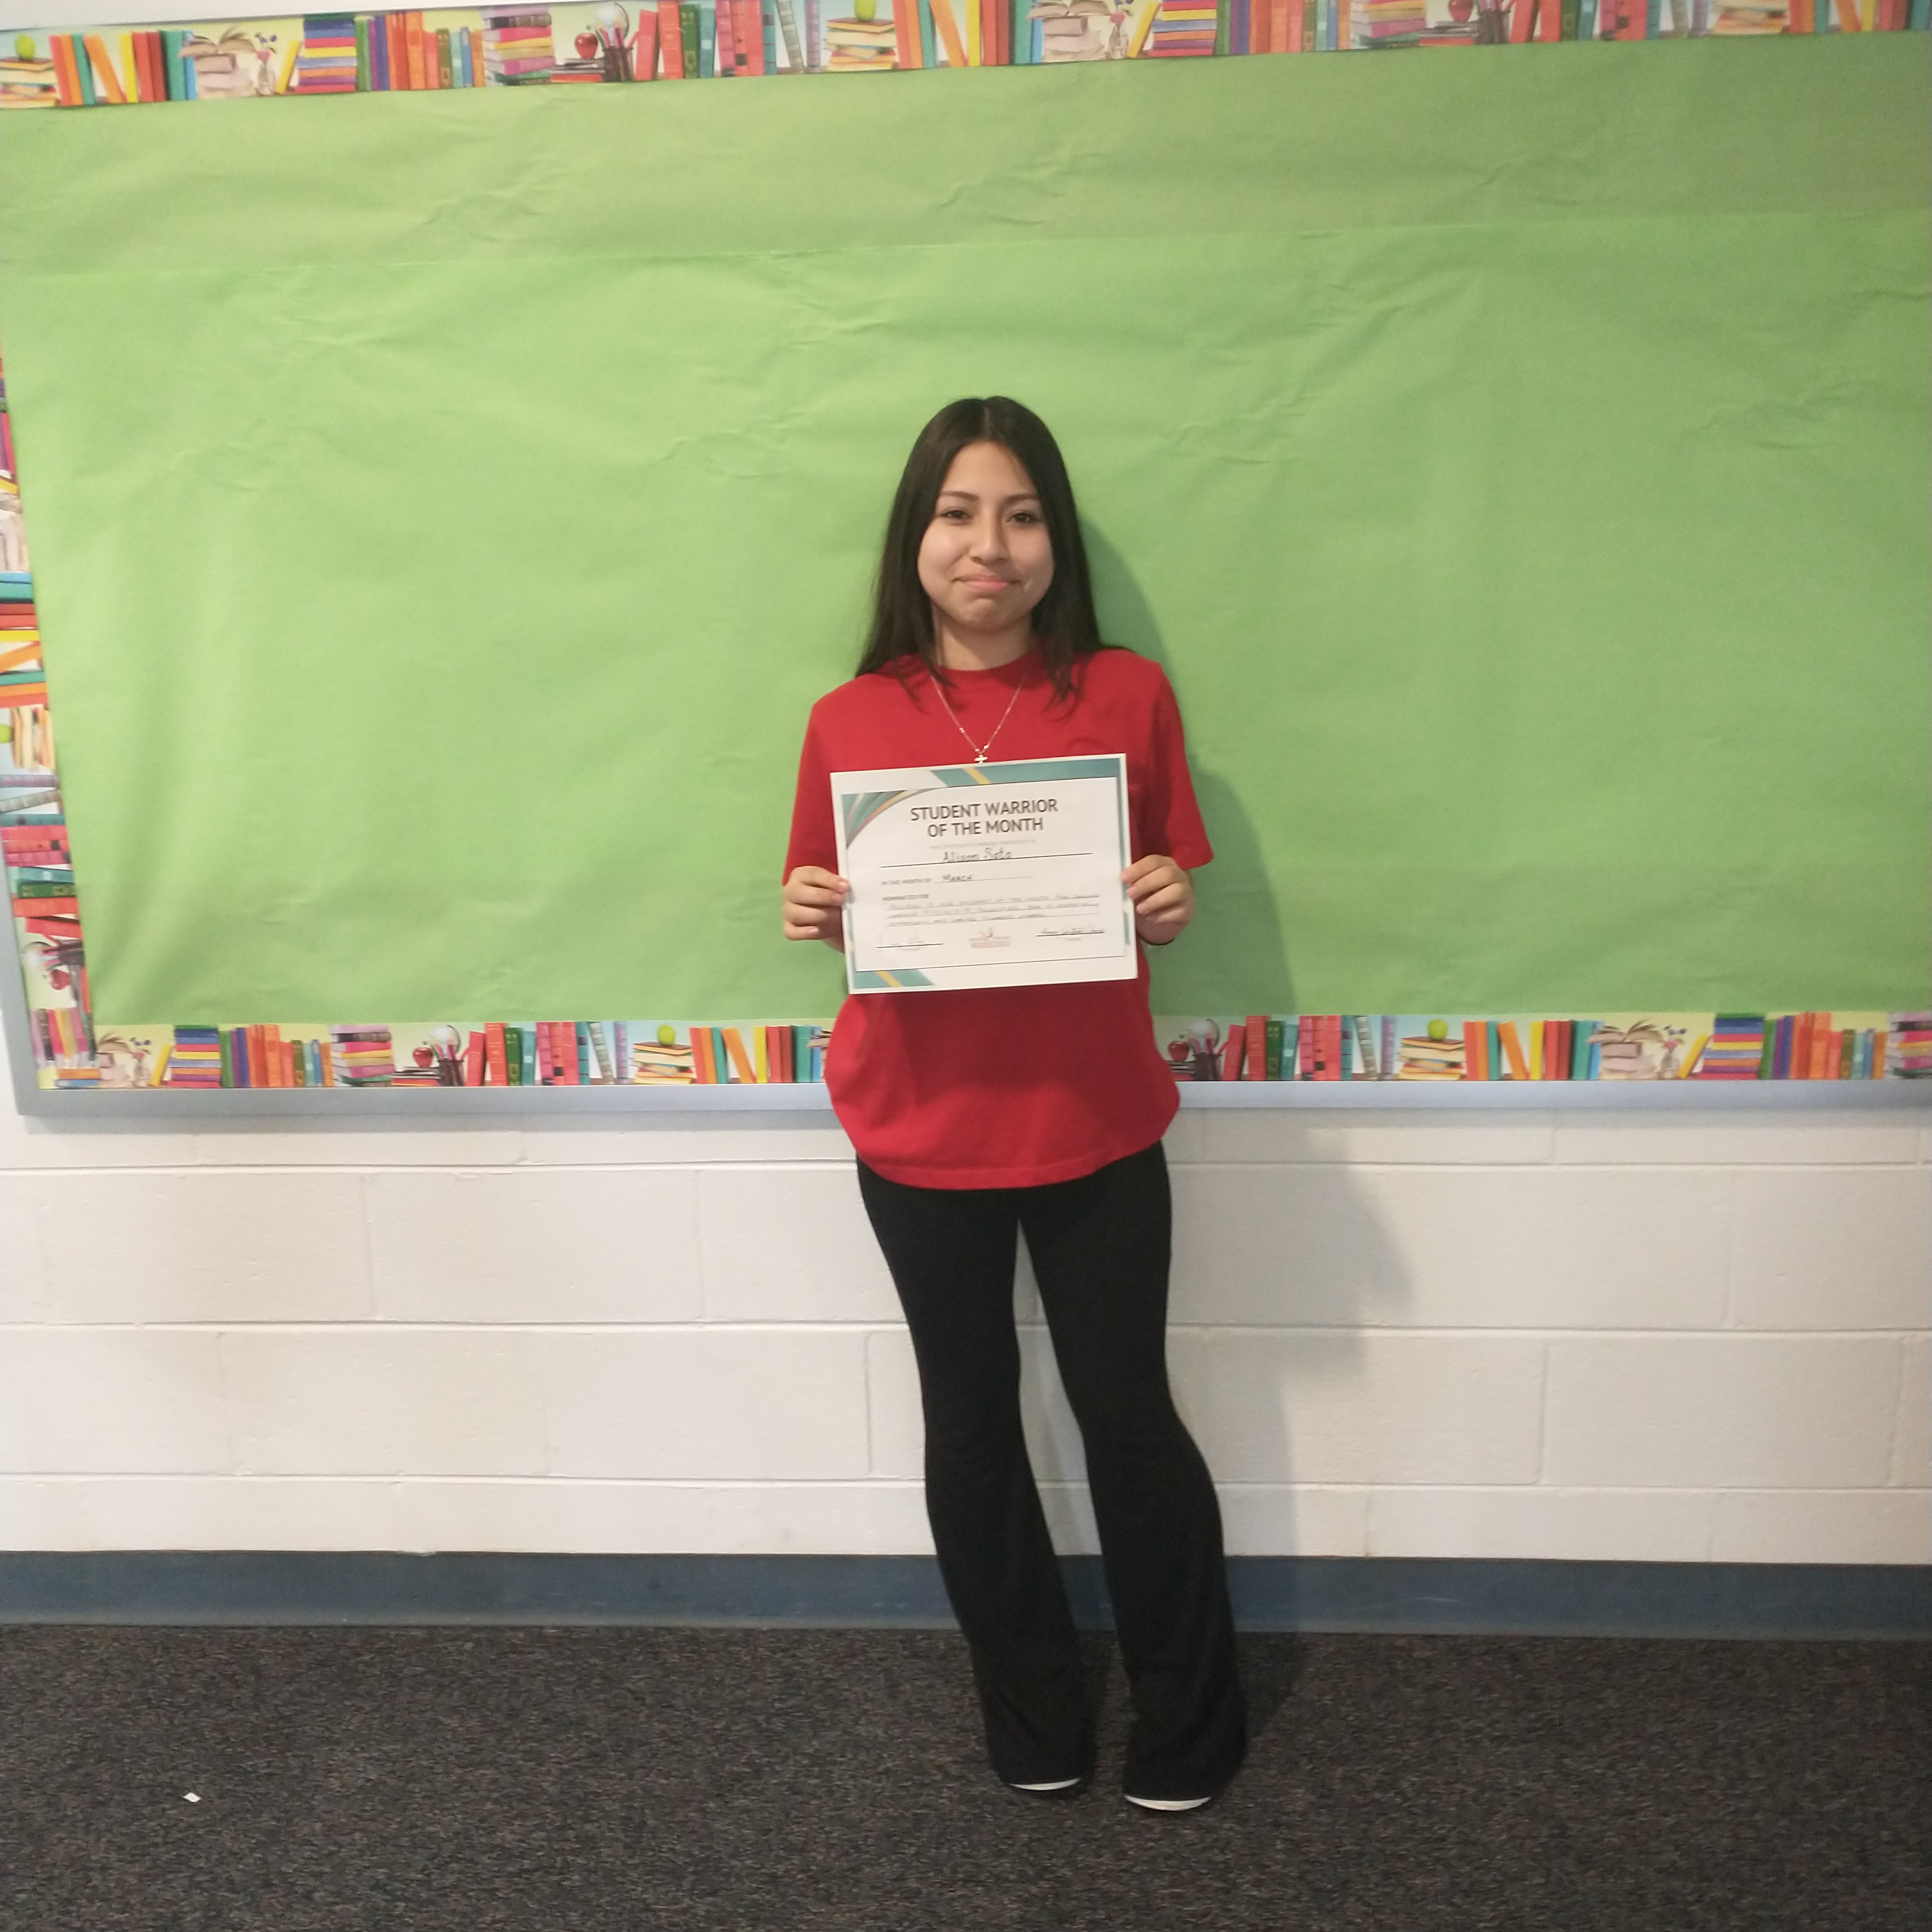 Congratulations to our 8th grade March student Warrior of the Month!